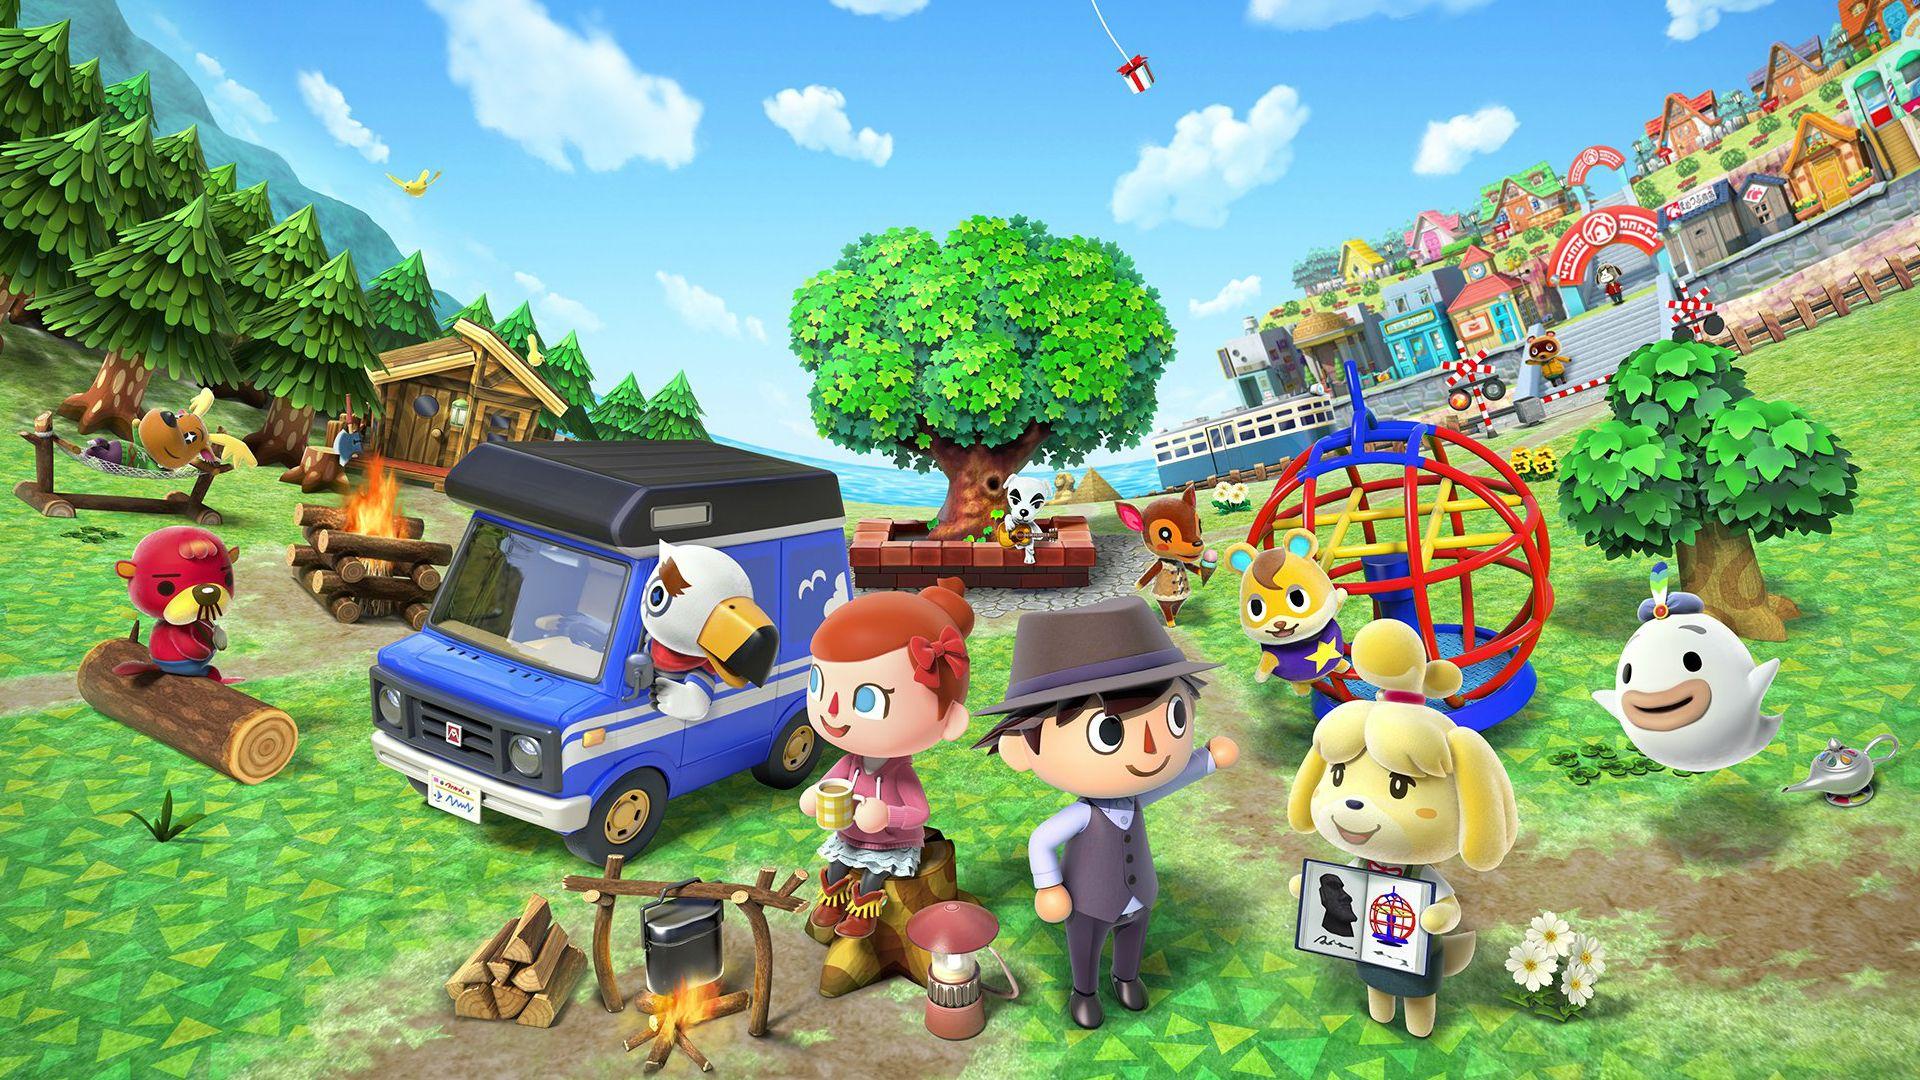 With Animal Crossing for Switch missing, Nintendo is playing it too